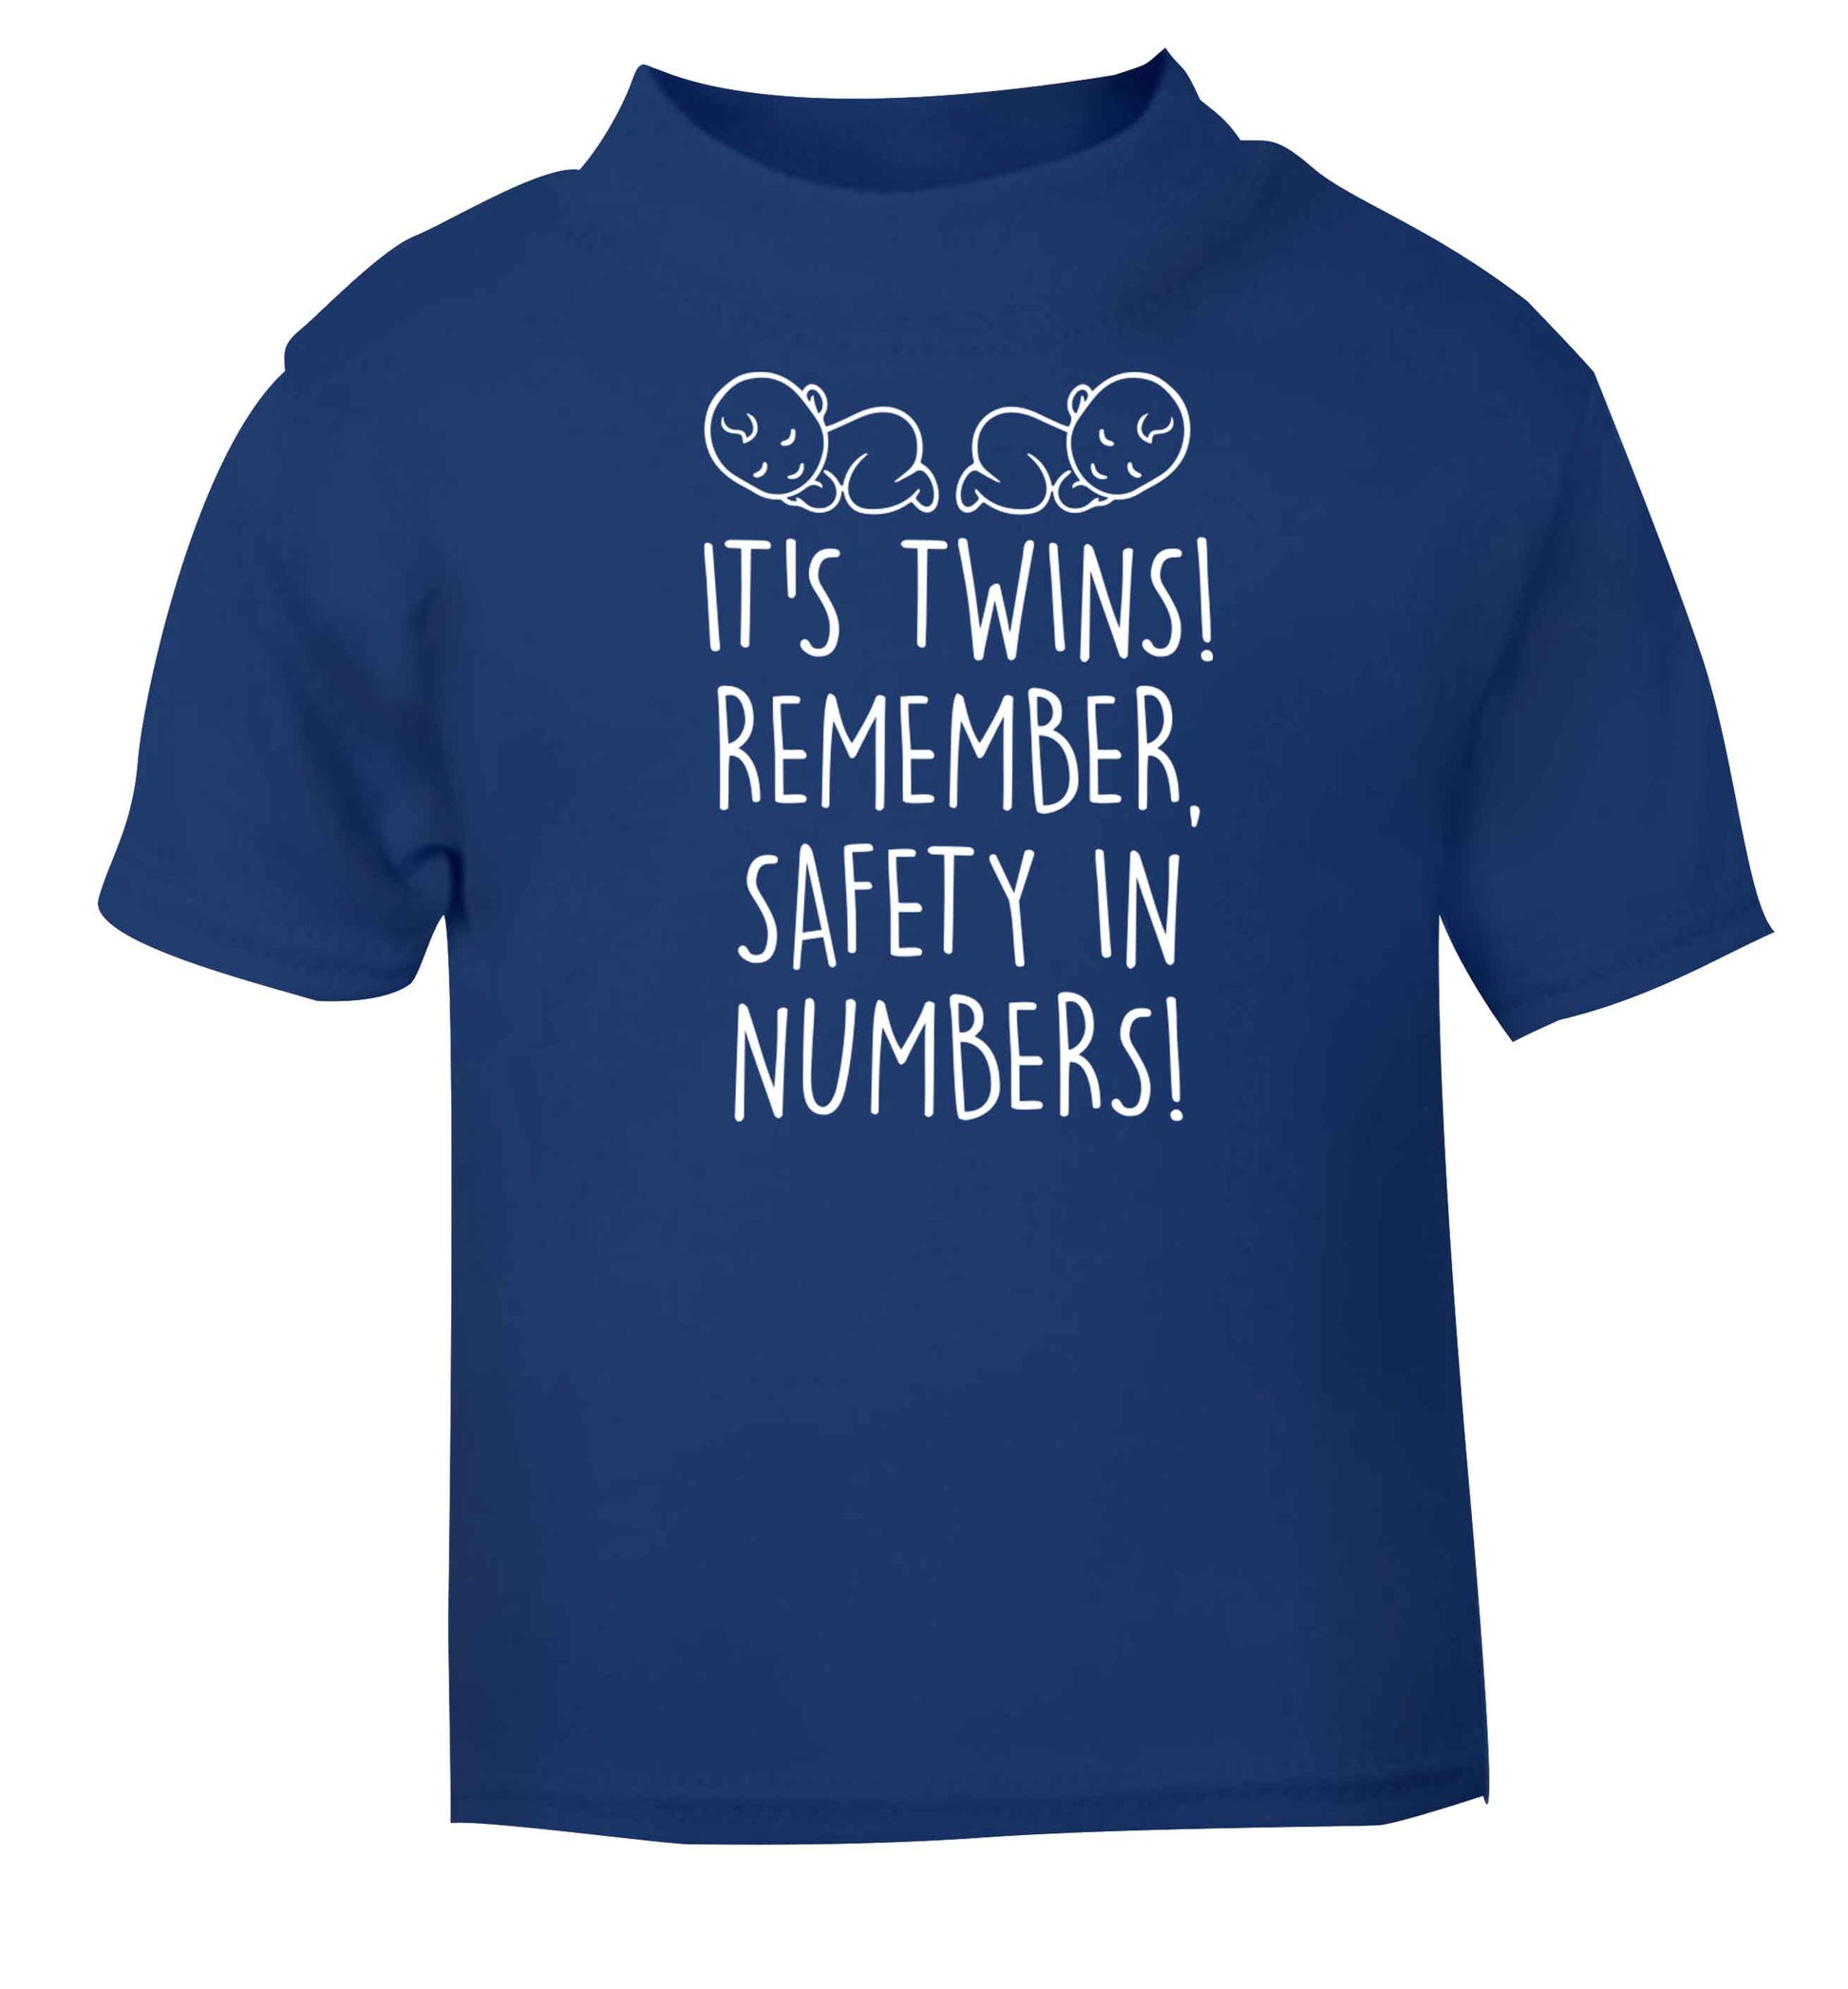 It's twins! Remember safety in numbers! blue baby toddler Tshirt 2 Years